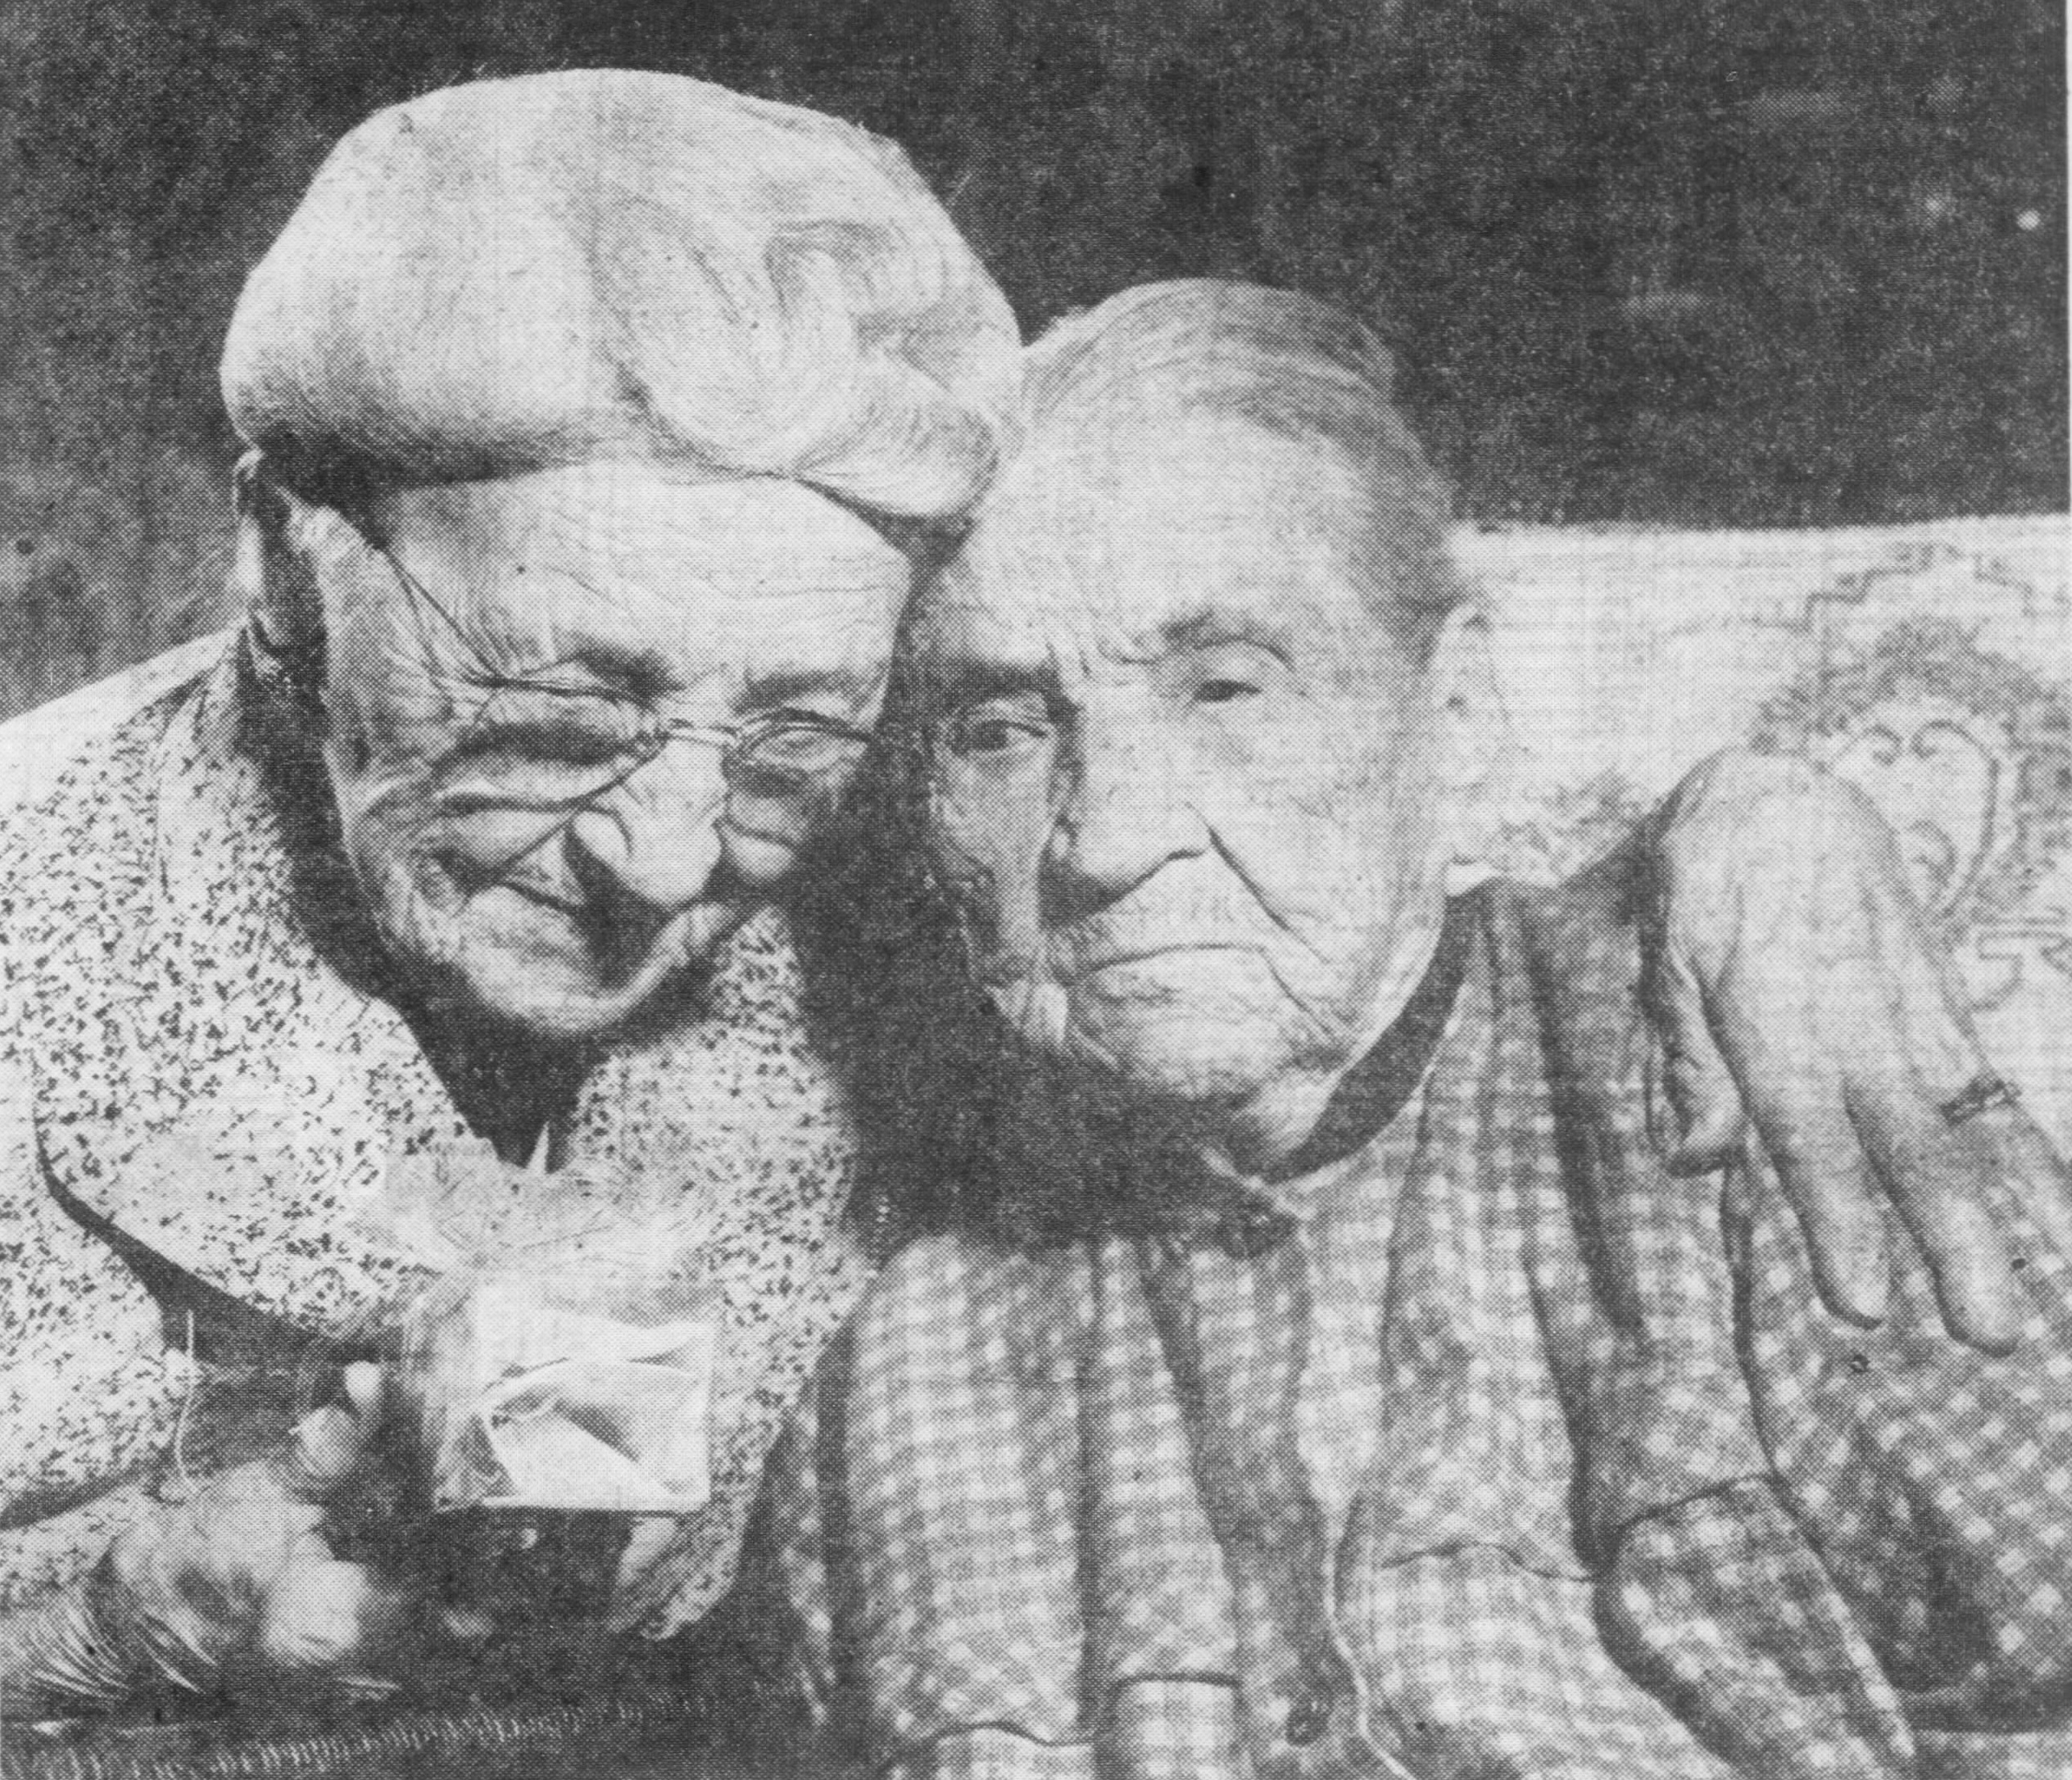 At the age of 106, with her 87-year-old daughter Ella (left). (Source: Detroit Free Press)